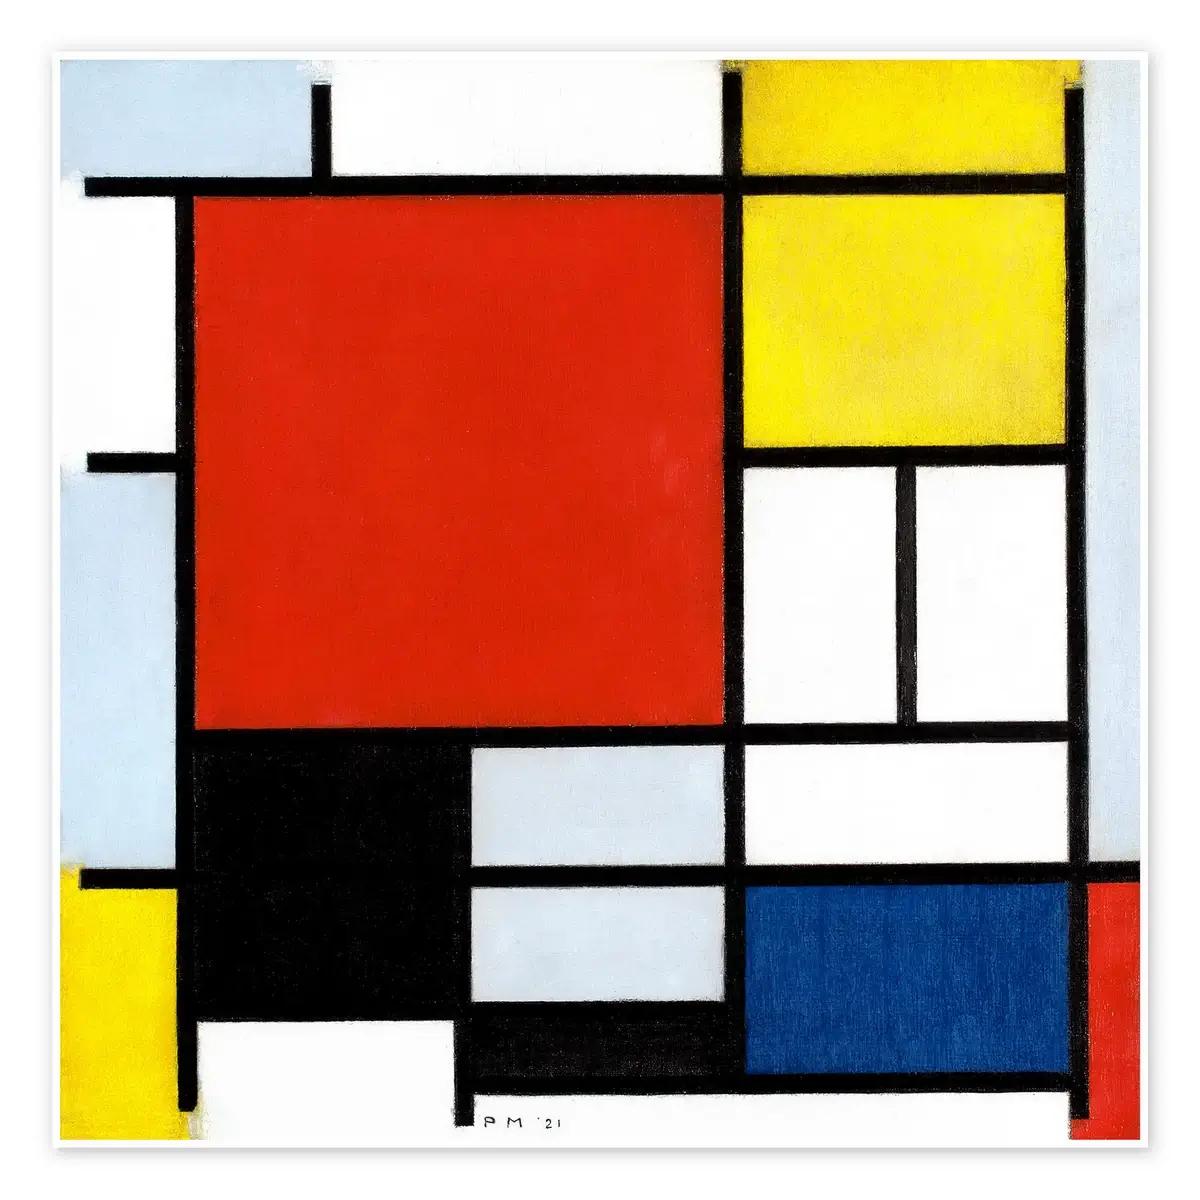 Mondrian's "Composition with Red, Blue, and Yellow" (c. 1930)